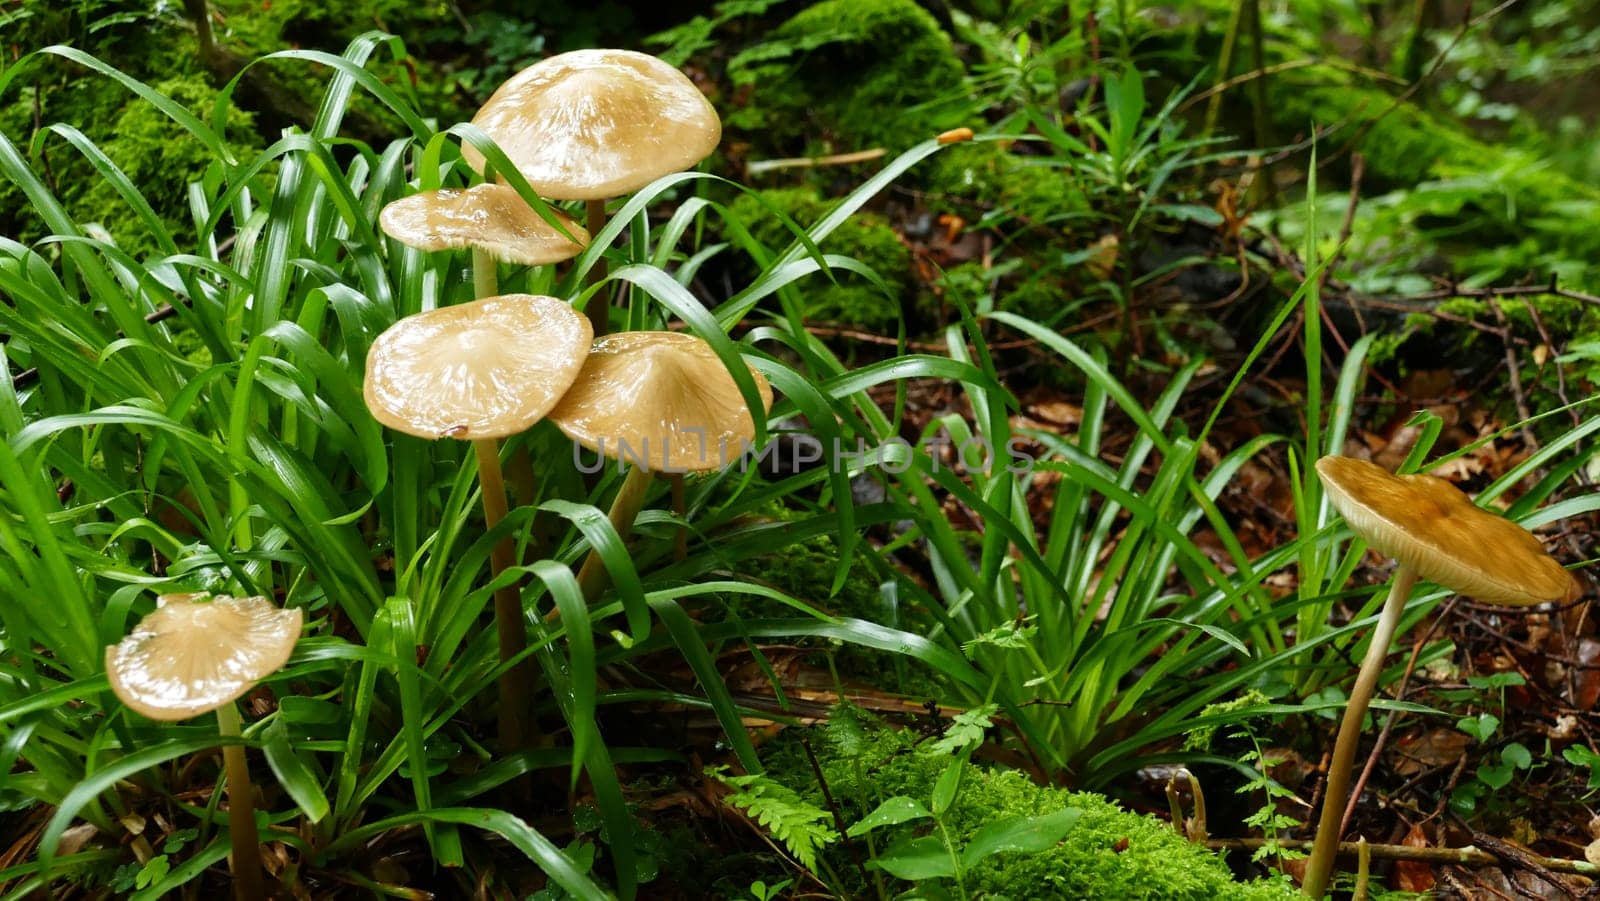 Group of mushrooms among the forest vegetation by XabiDonostia